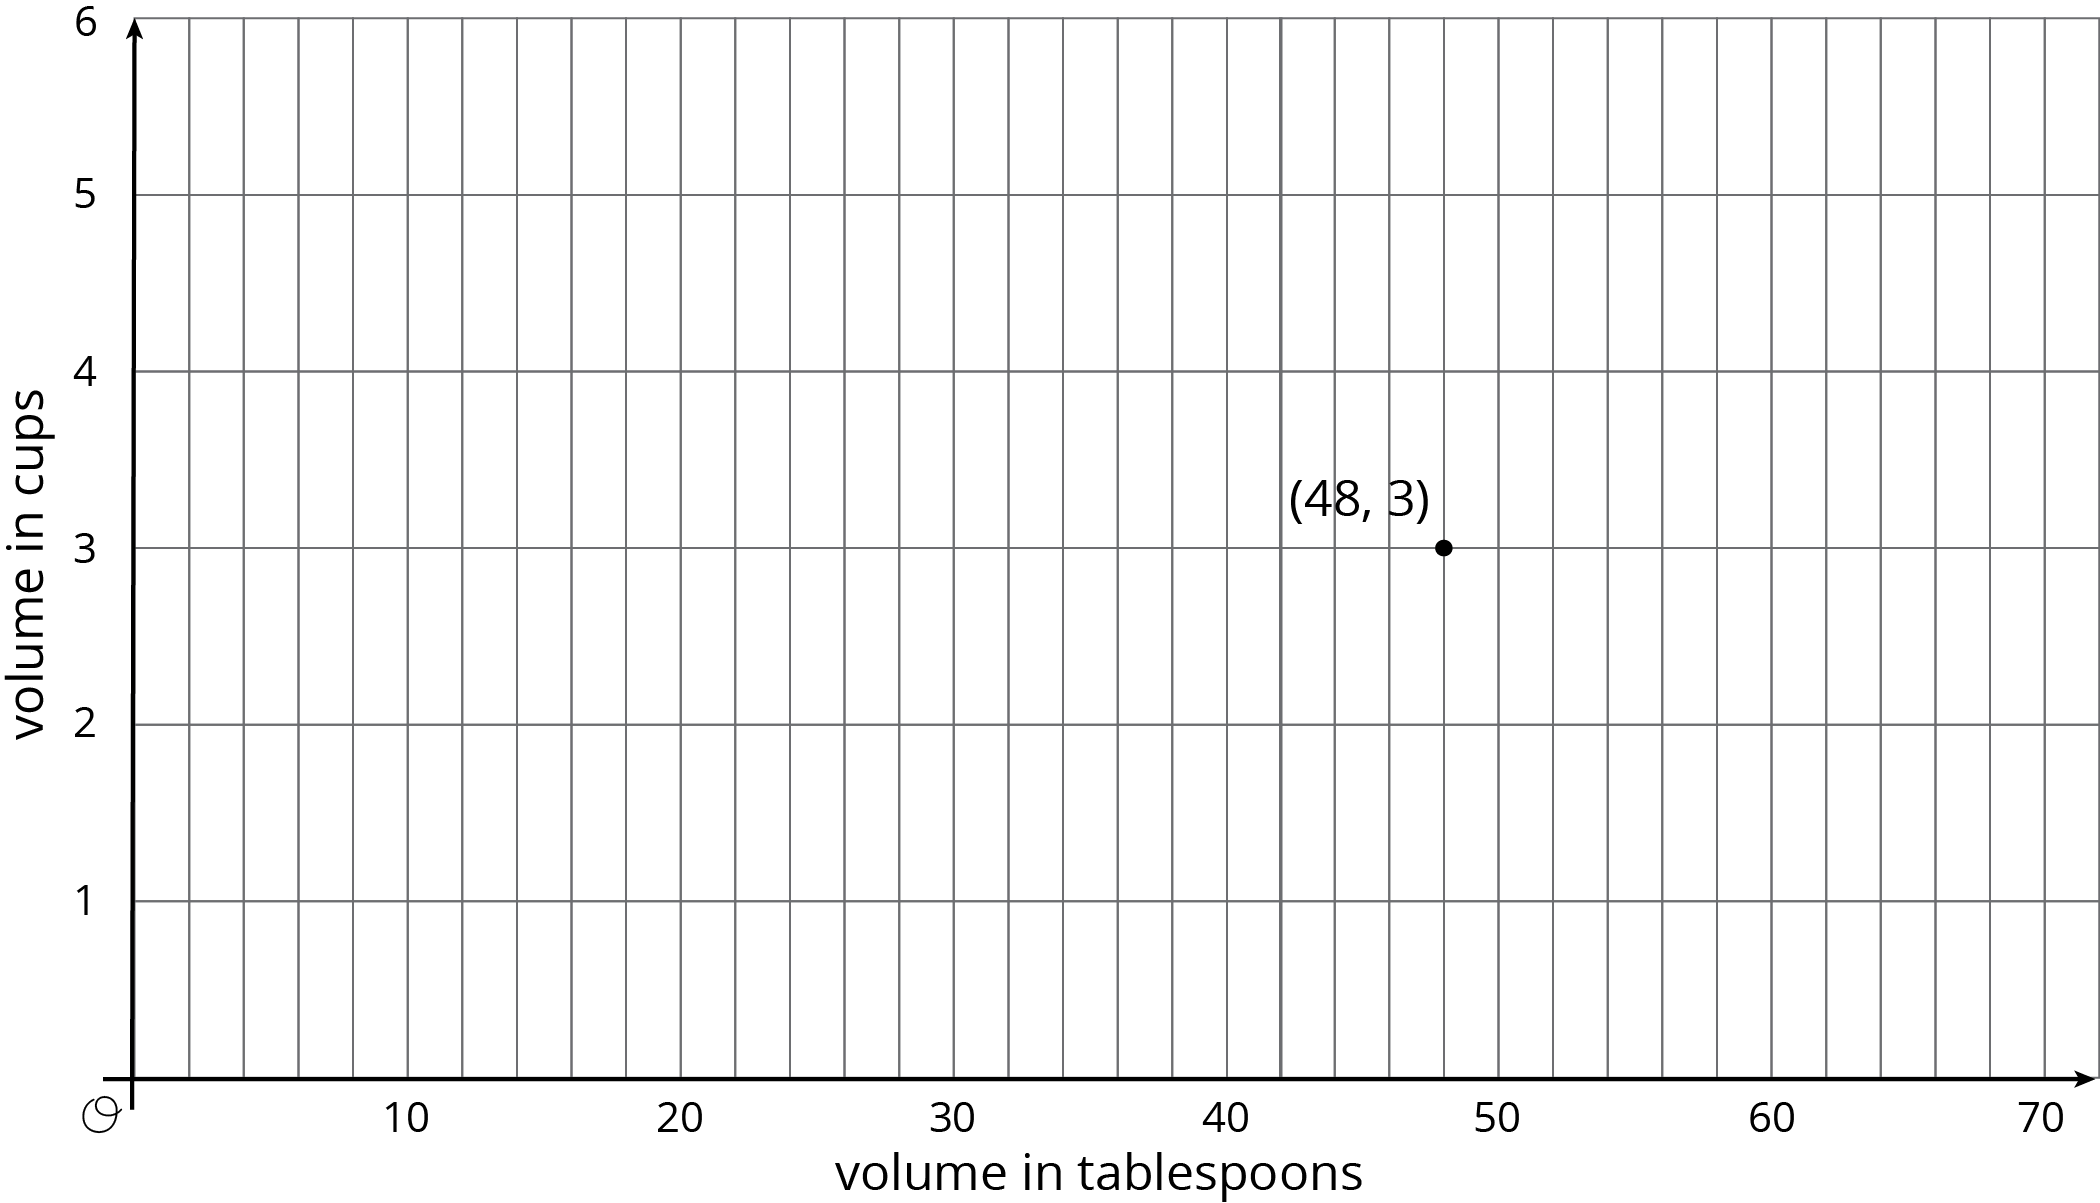 A point plotted in the coordinate plane with the origin labeled “O”. The horizontal axis is labeled “volume in tablespoons” and the numbers 0 through 70, in increments of 10, are indicated. There are four evenly spaced gridlines between each indicated number. The vertical axis is labeled “volume in cups” and the numbers 0 through 6 are indicated. The indicated point has coordinates 48 comma 3.